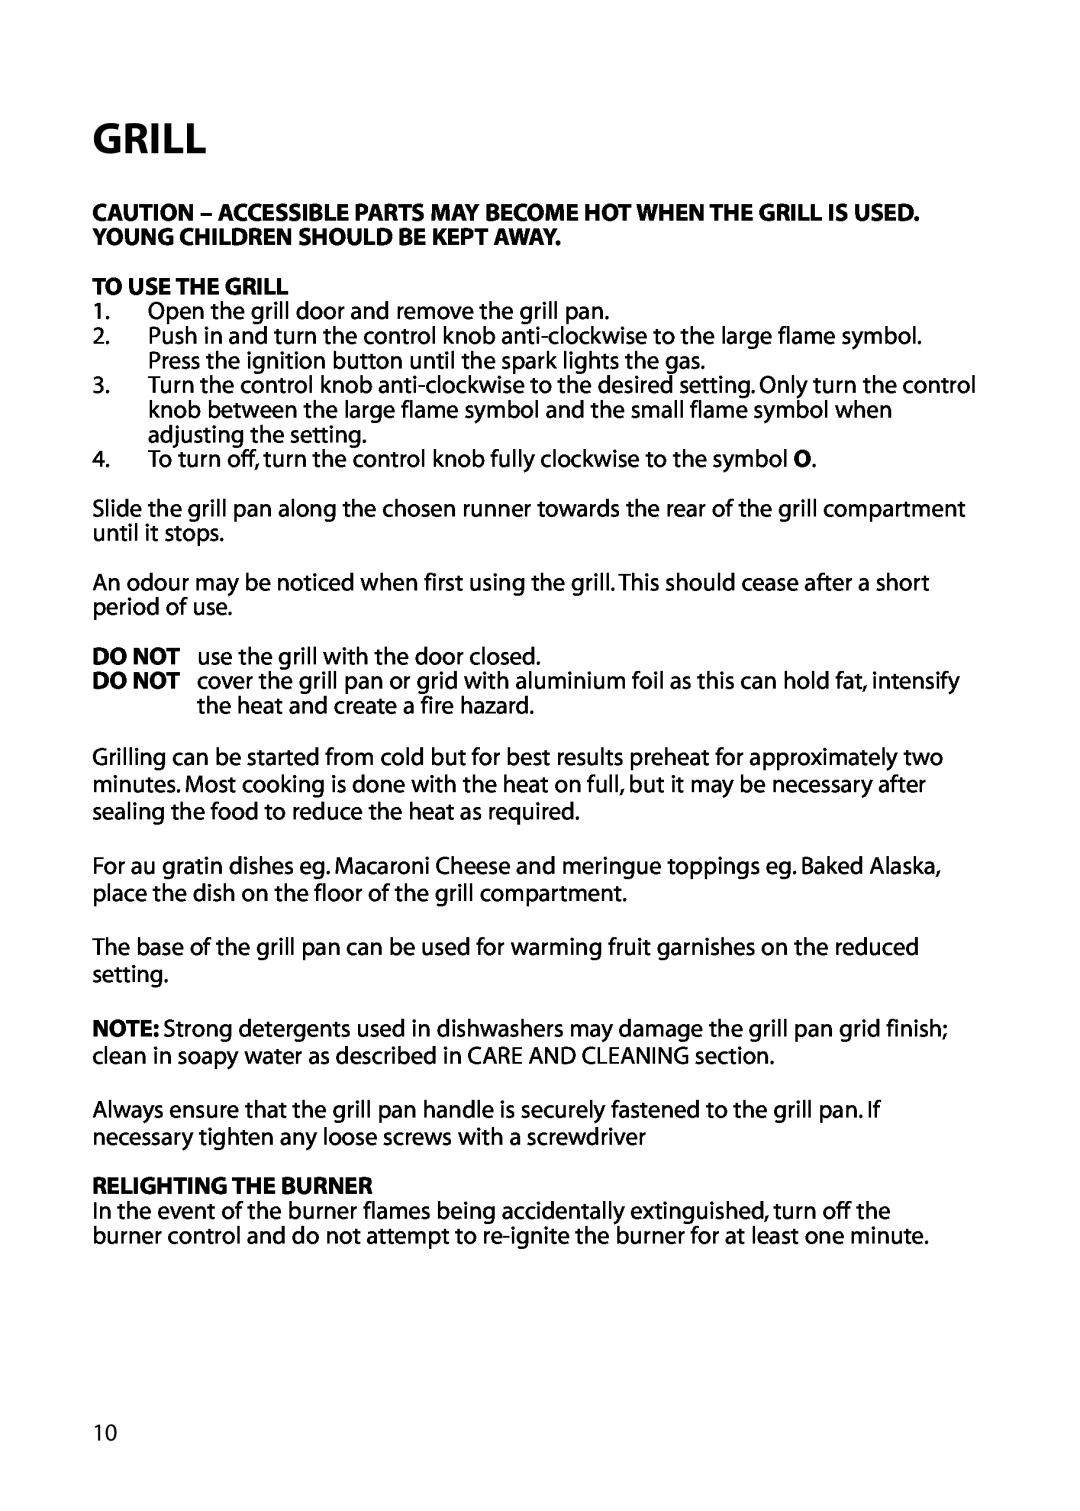 Hotpoint EG52 installation instructions To Use The Grill, Relighting The Burner 